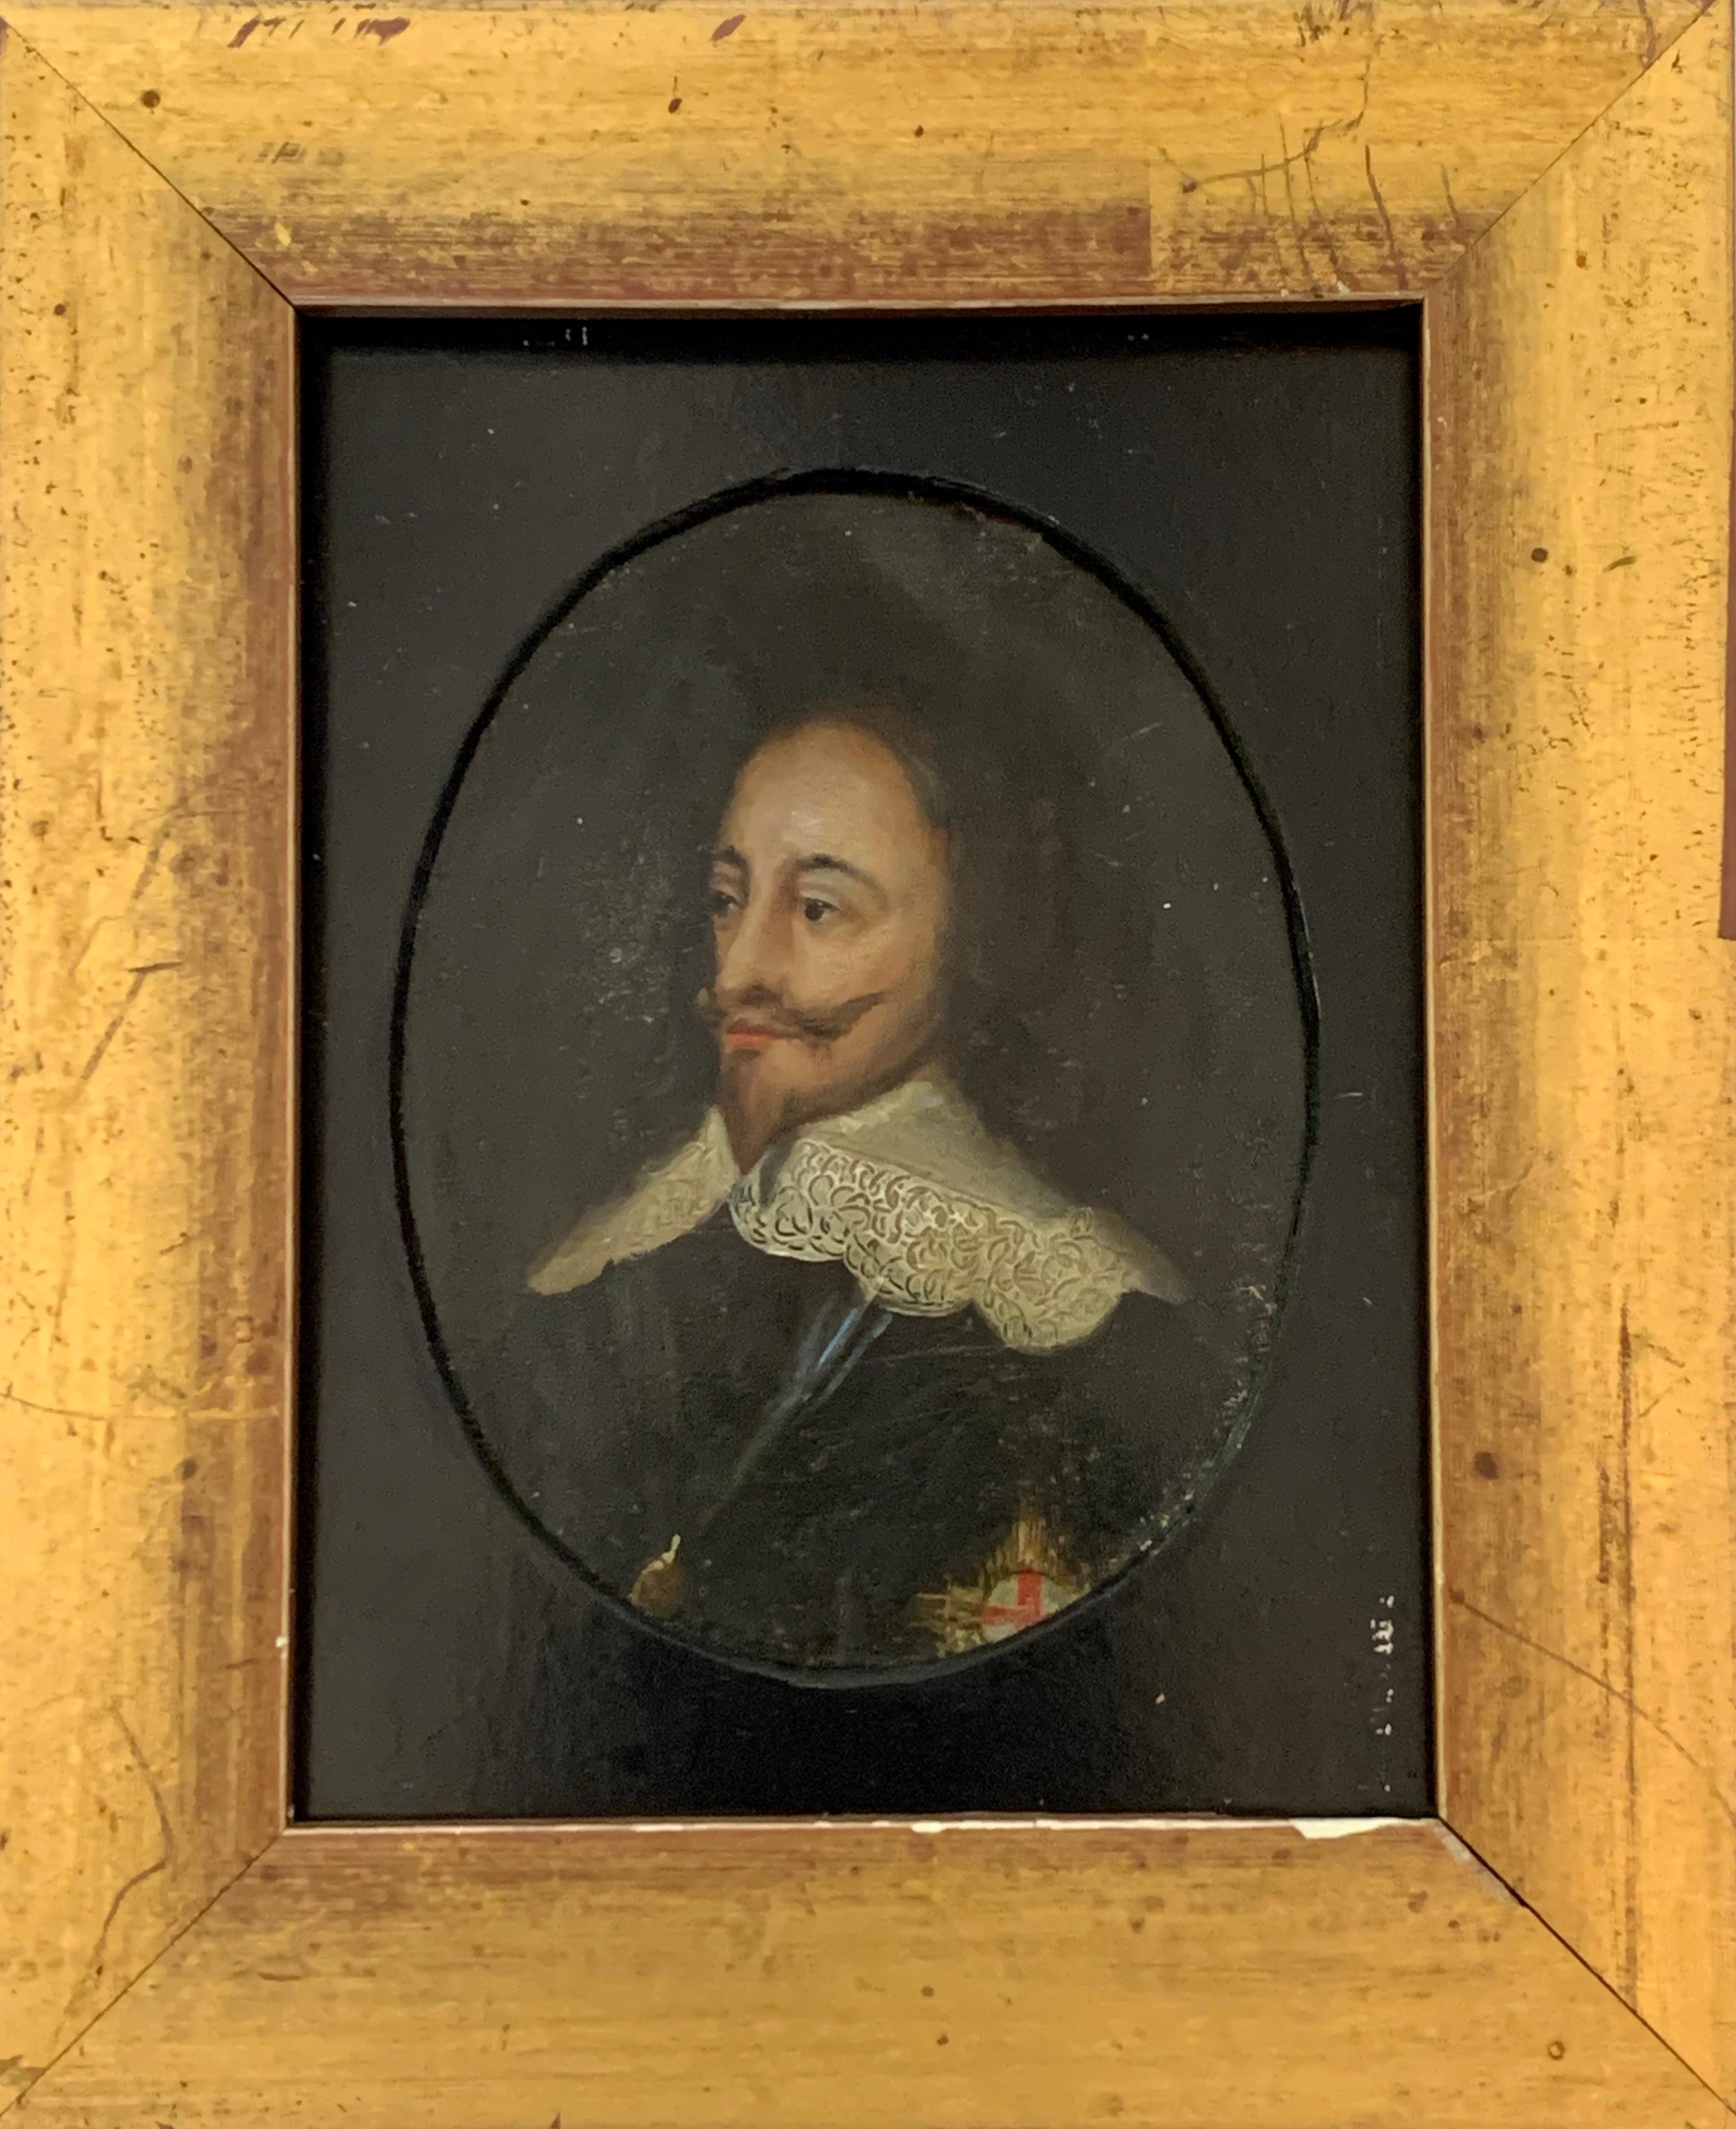 18th century portrait of Charles the First of England painted on copper